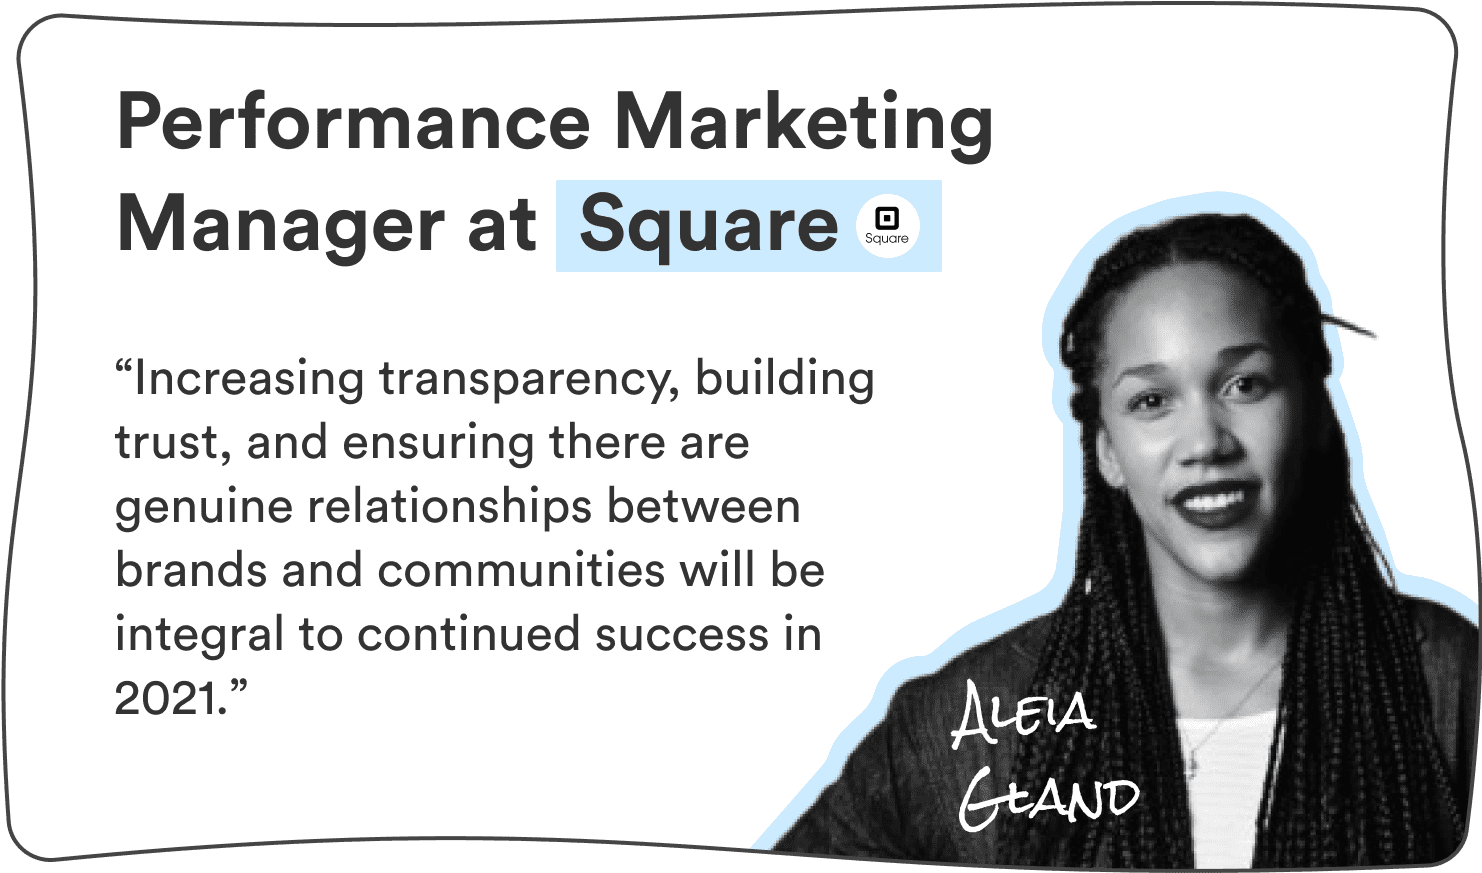 Aleia Gland, Performance Marketing Manager at Square: “Increasing transparency, building trust, and ensuring there are genuine relationships between brand and communities will be integral to continued success in 2021.”